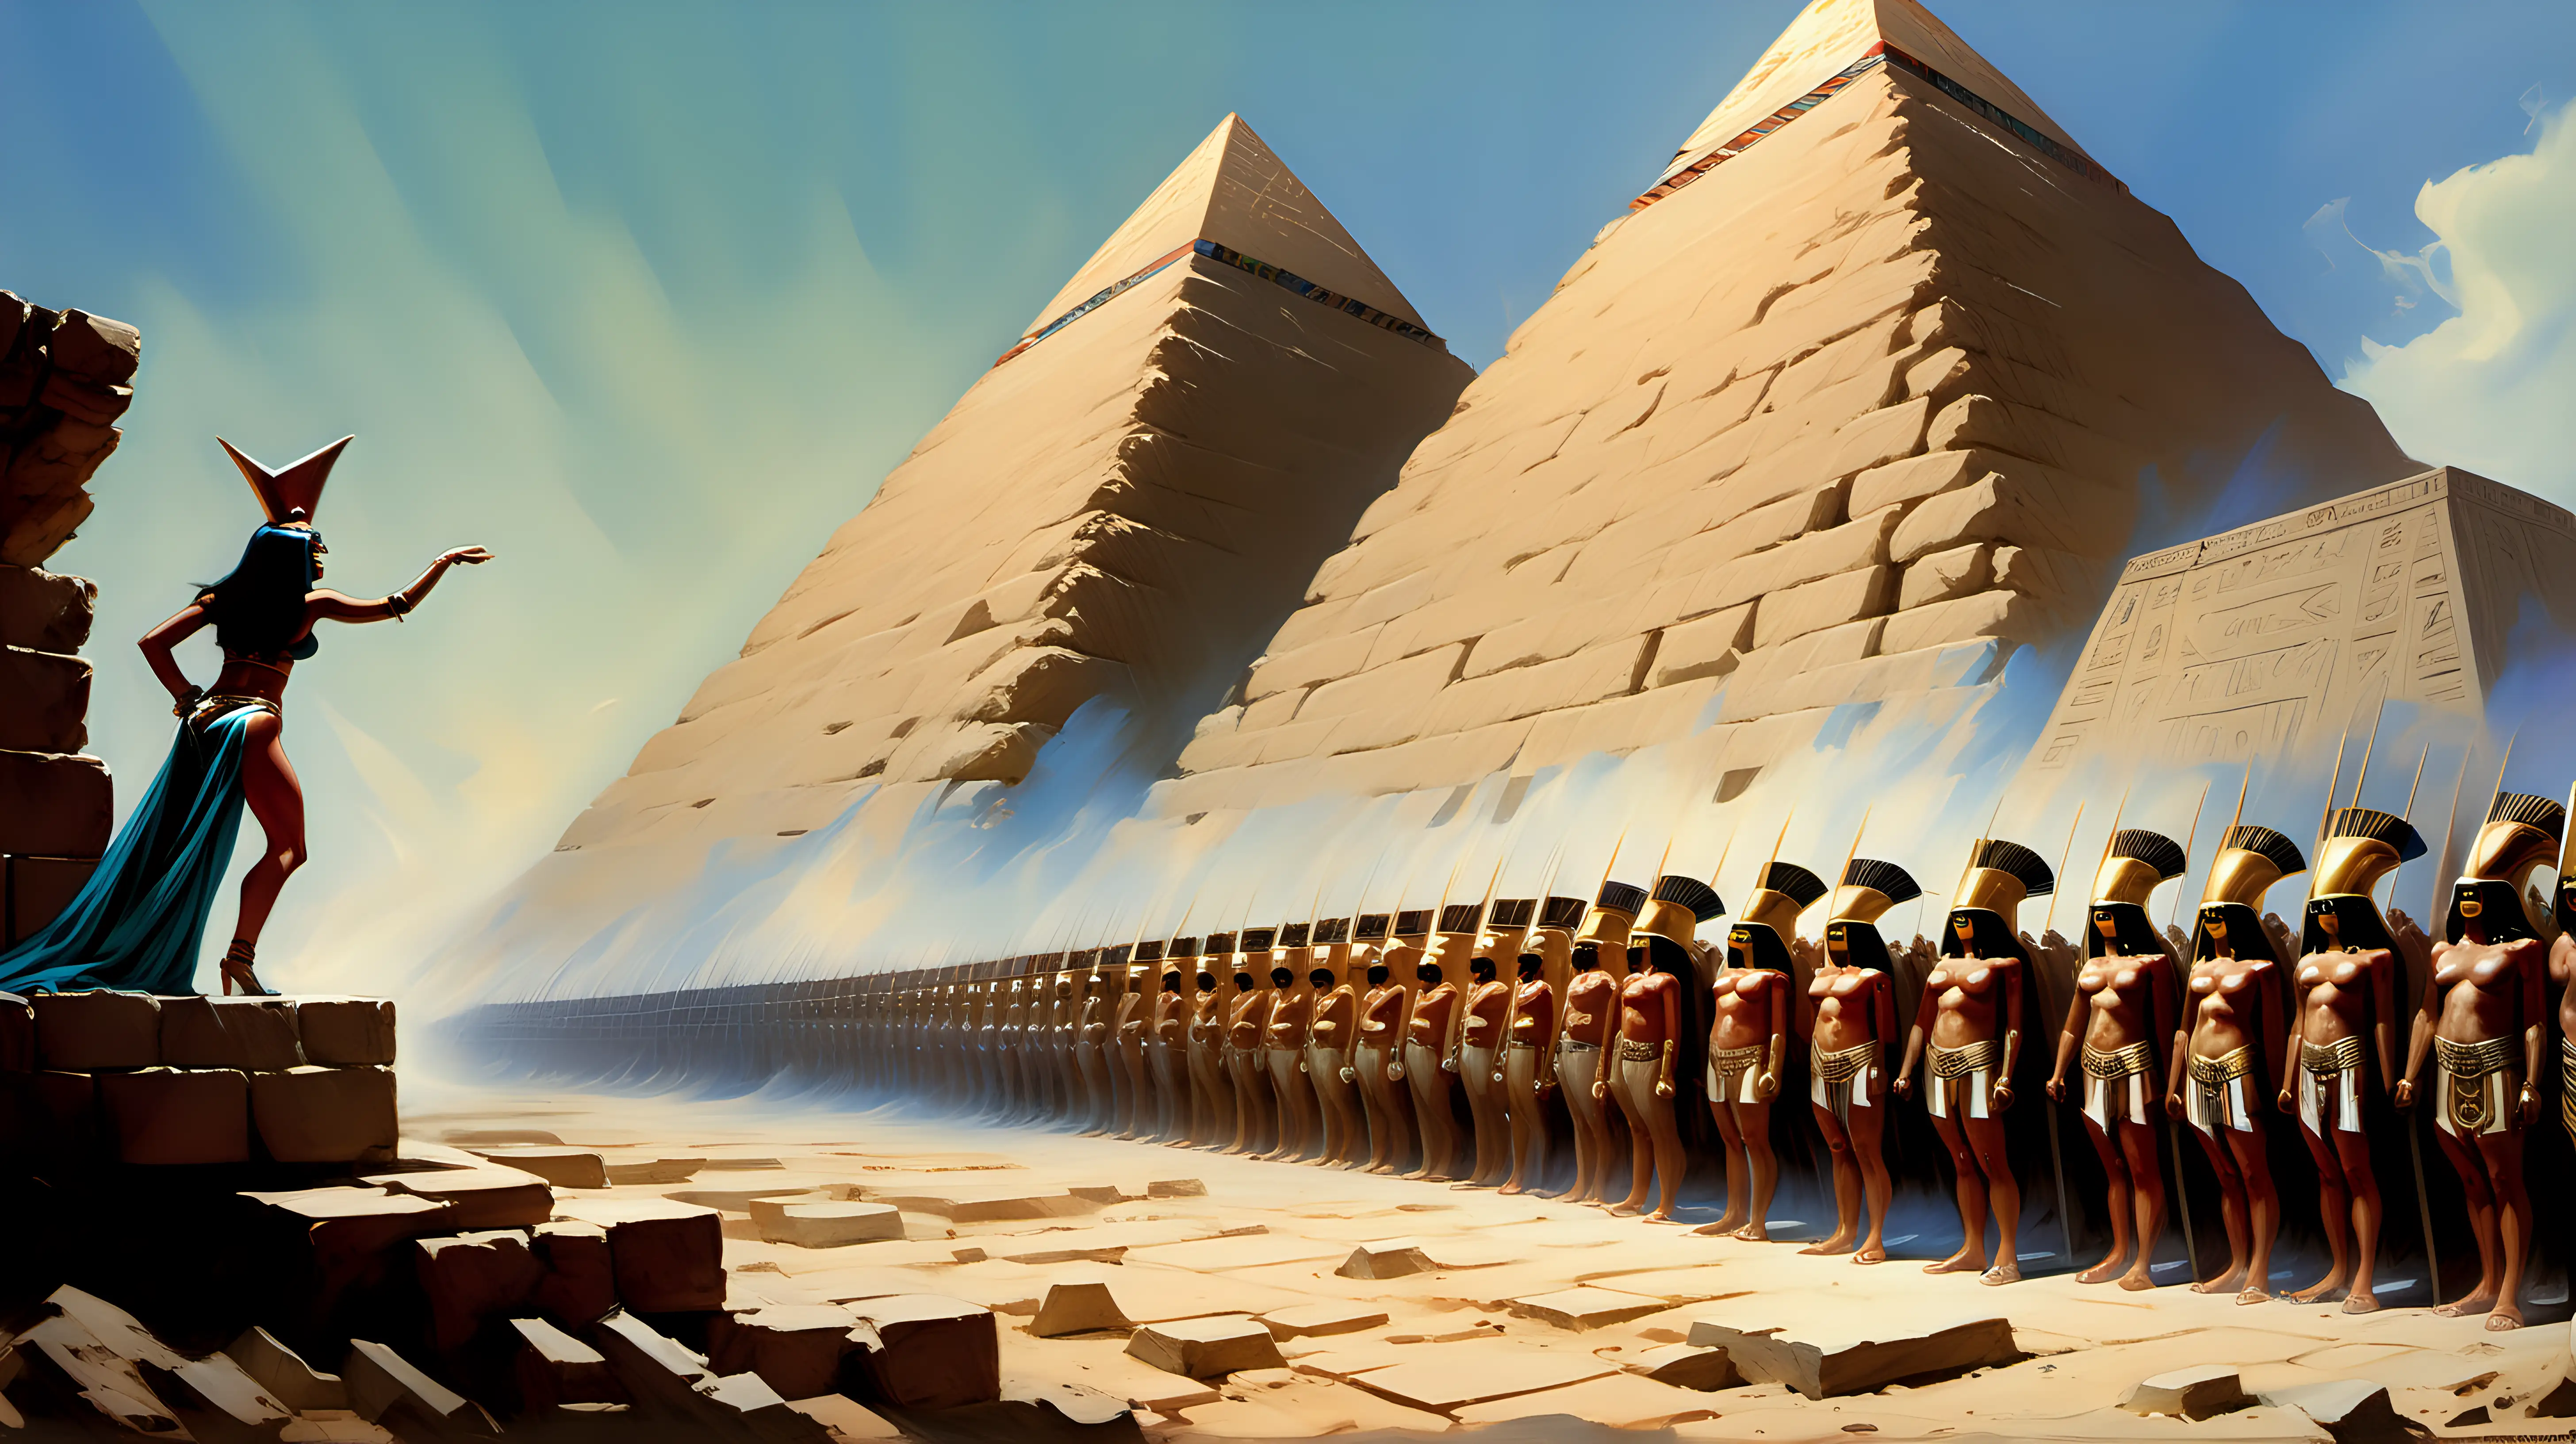 Donald Trump and Cleopatra Building a Massive Wall Around Egyptian Pyramids in Frank Frazetta Style